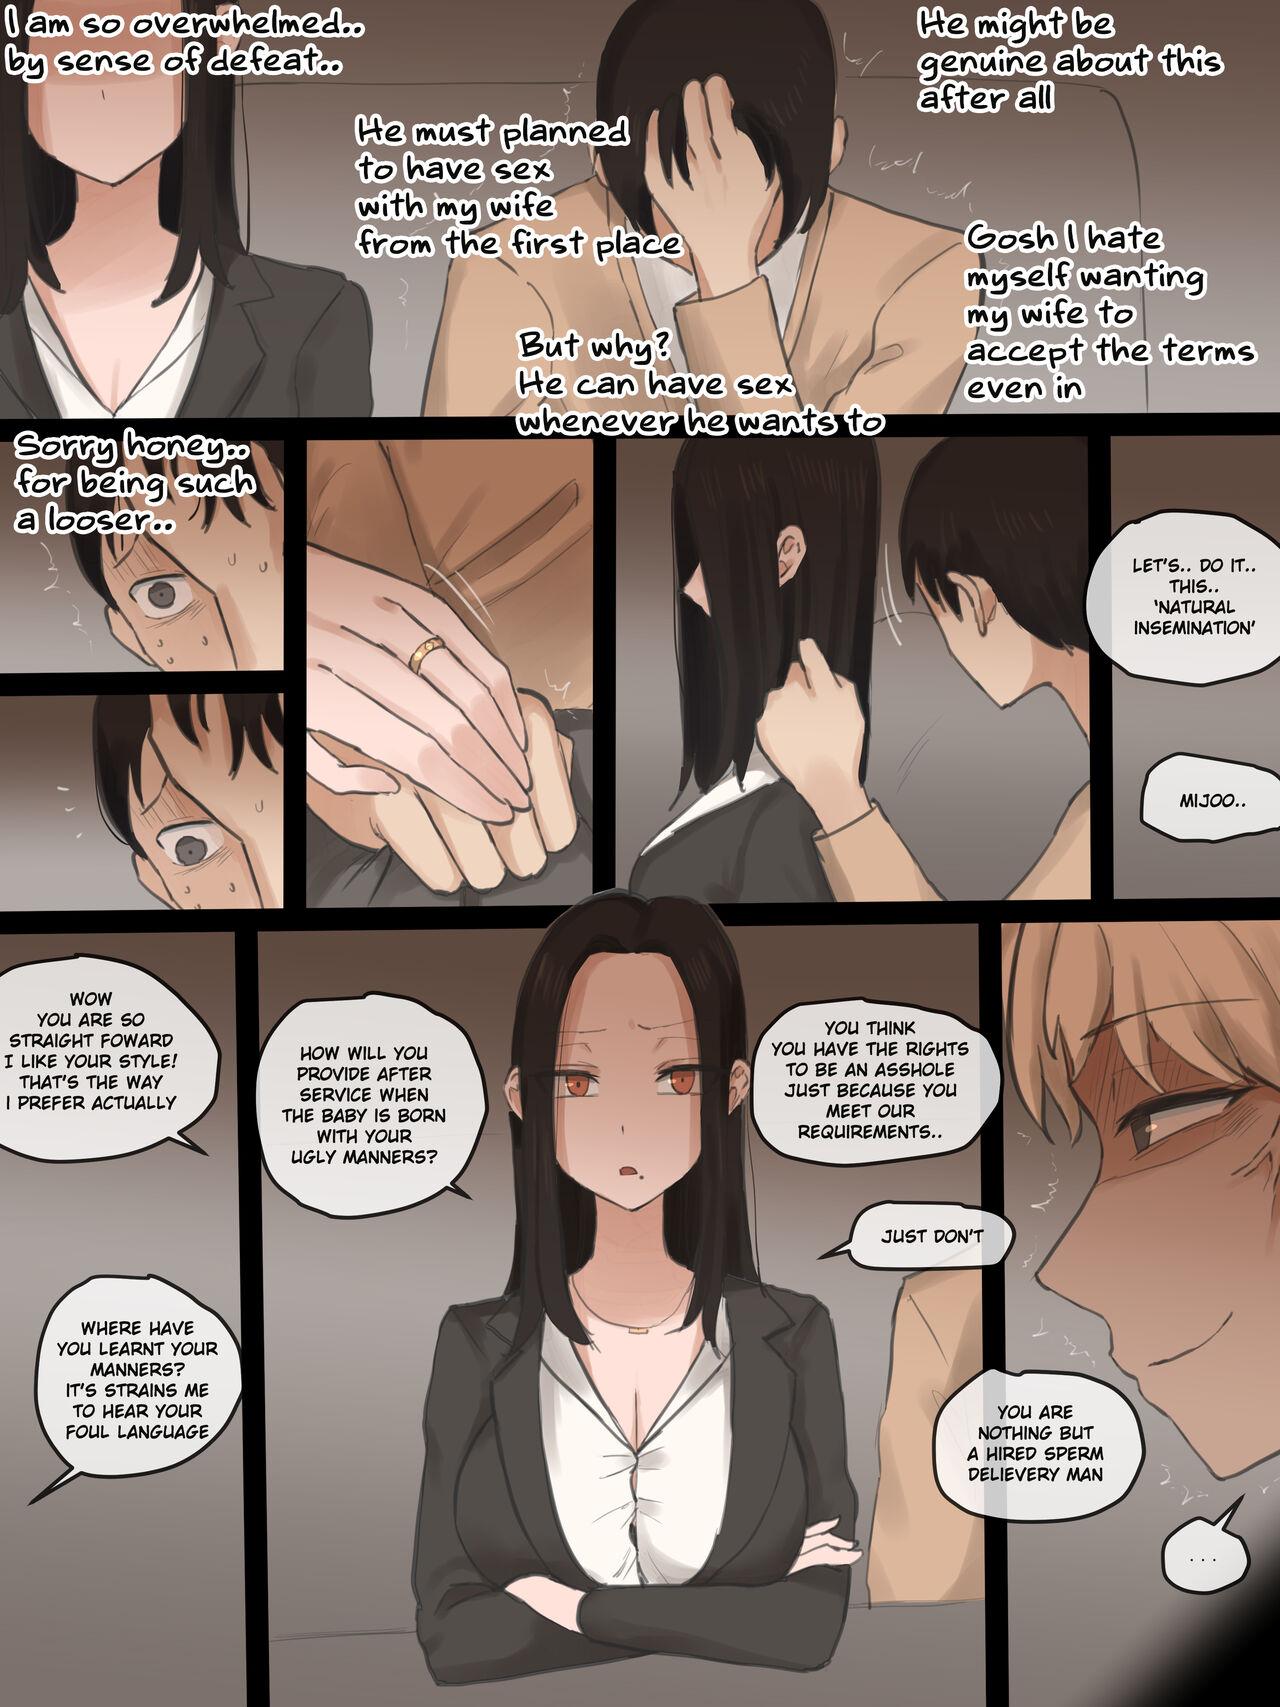 Long Hair DOUBT - Original Officesex - Page 11